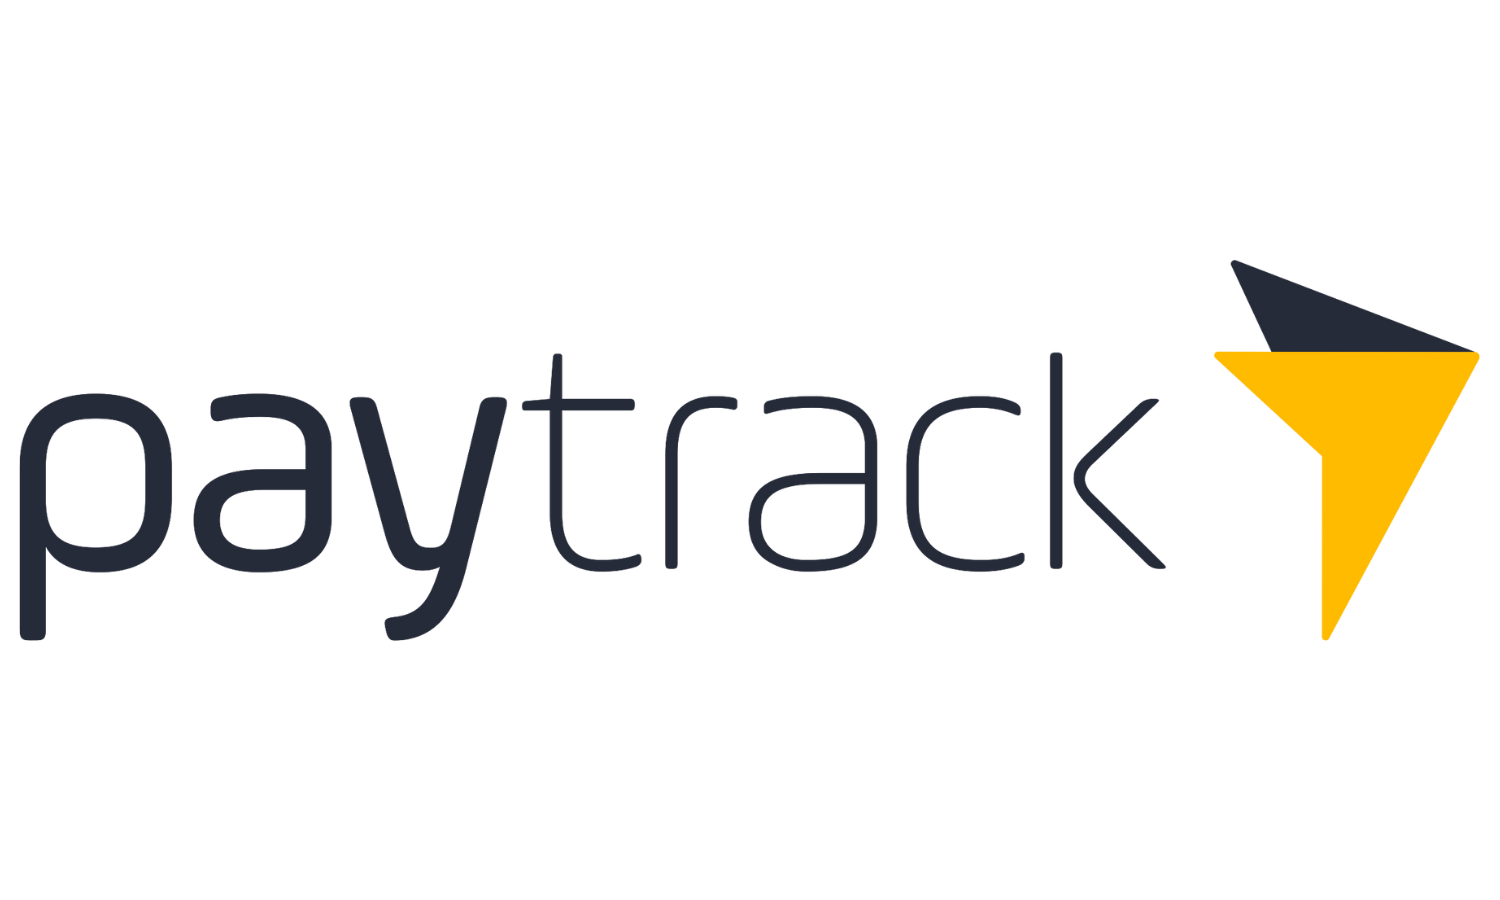 Paytrack.